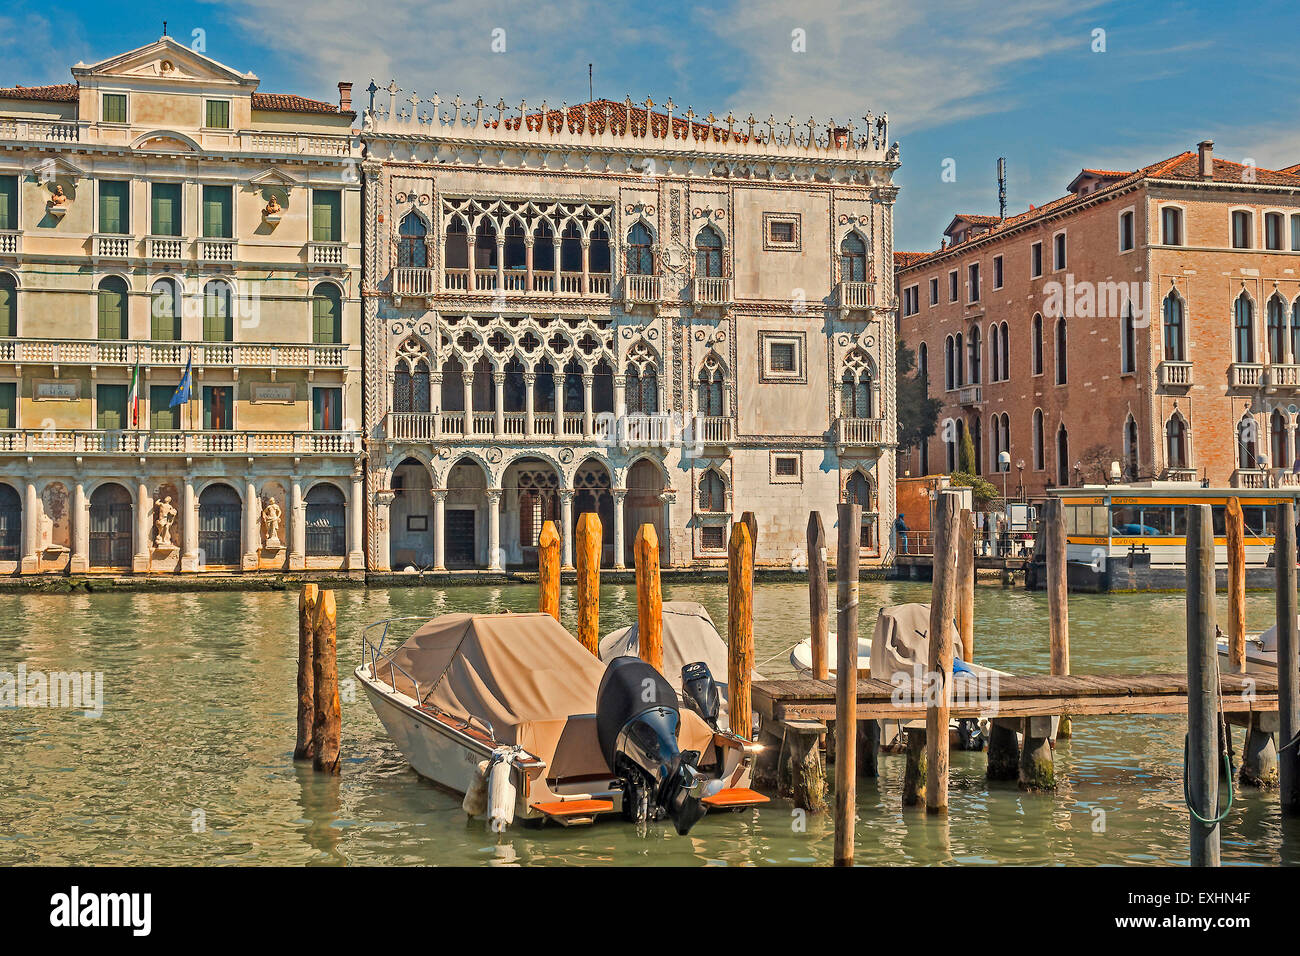 Buildings On The Grand Canal Venice Italy Stock Photo